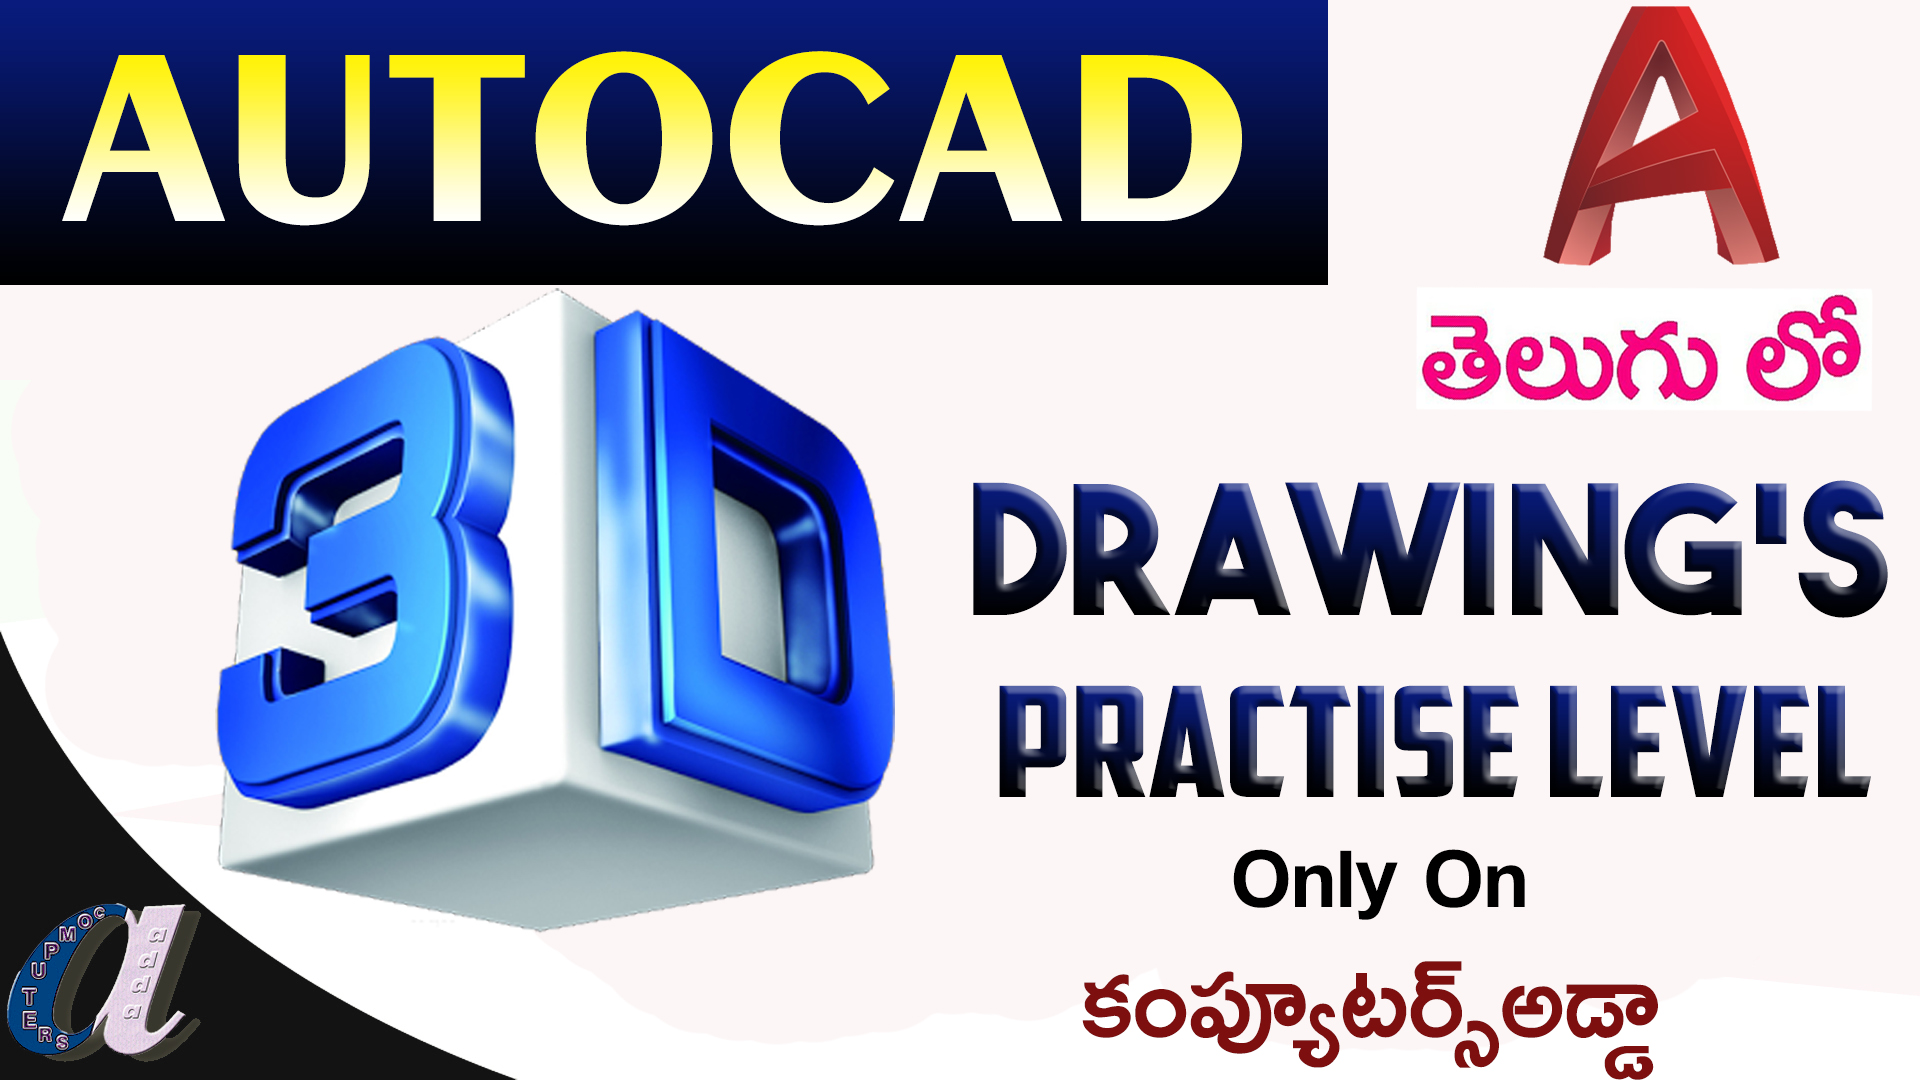 2D CAD EXERCISES 608 - STUDYCADCAM | Autocad drawing, Autocad isometric  drawing, Industrial design sketch